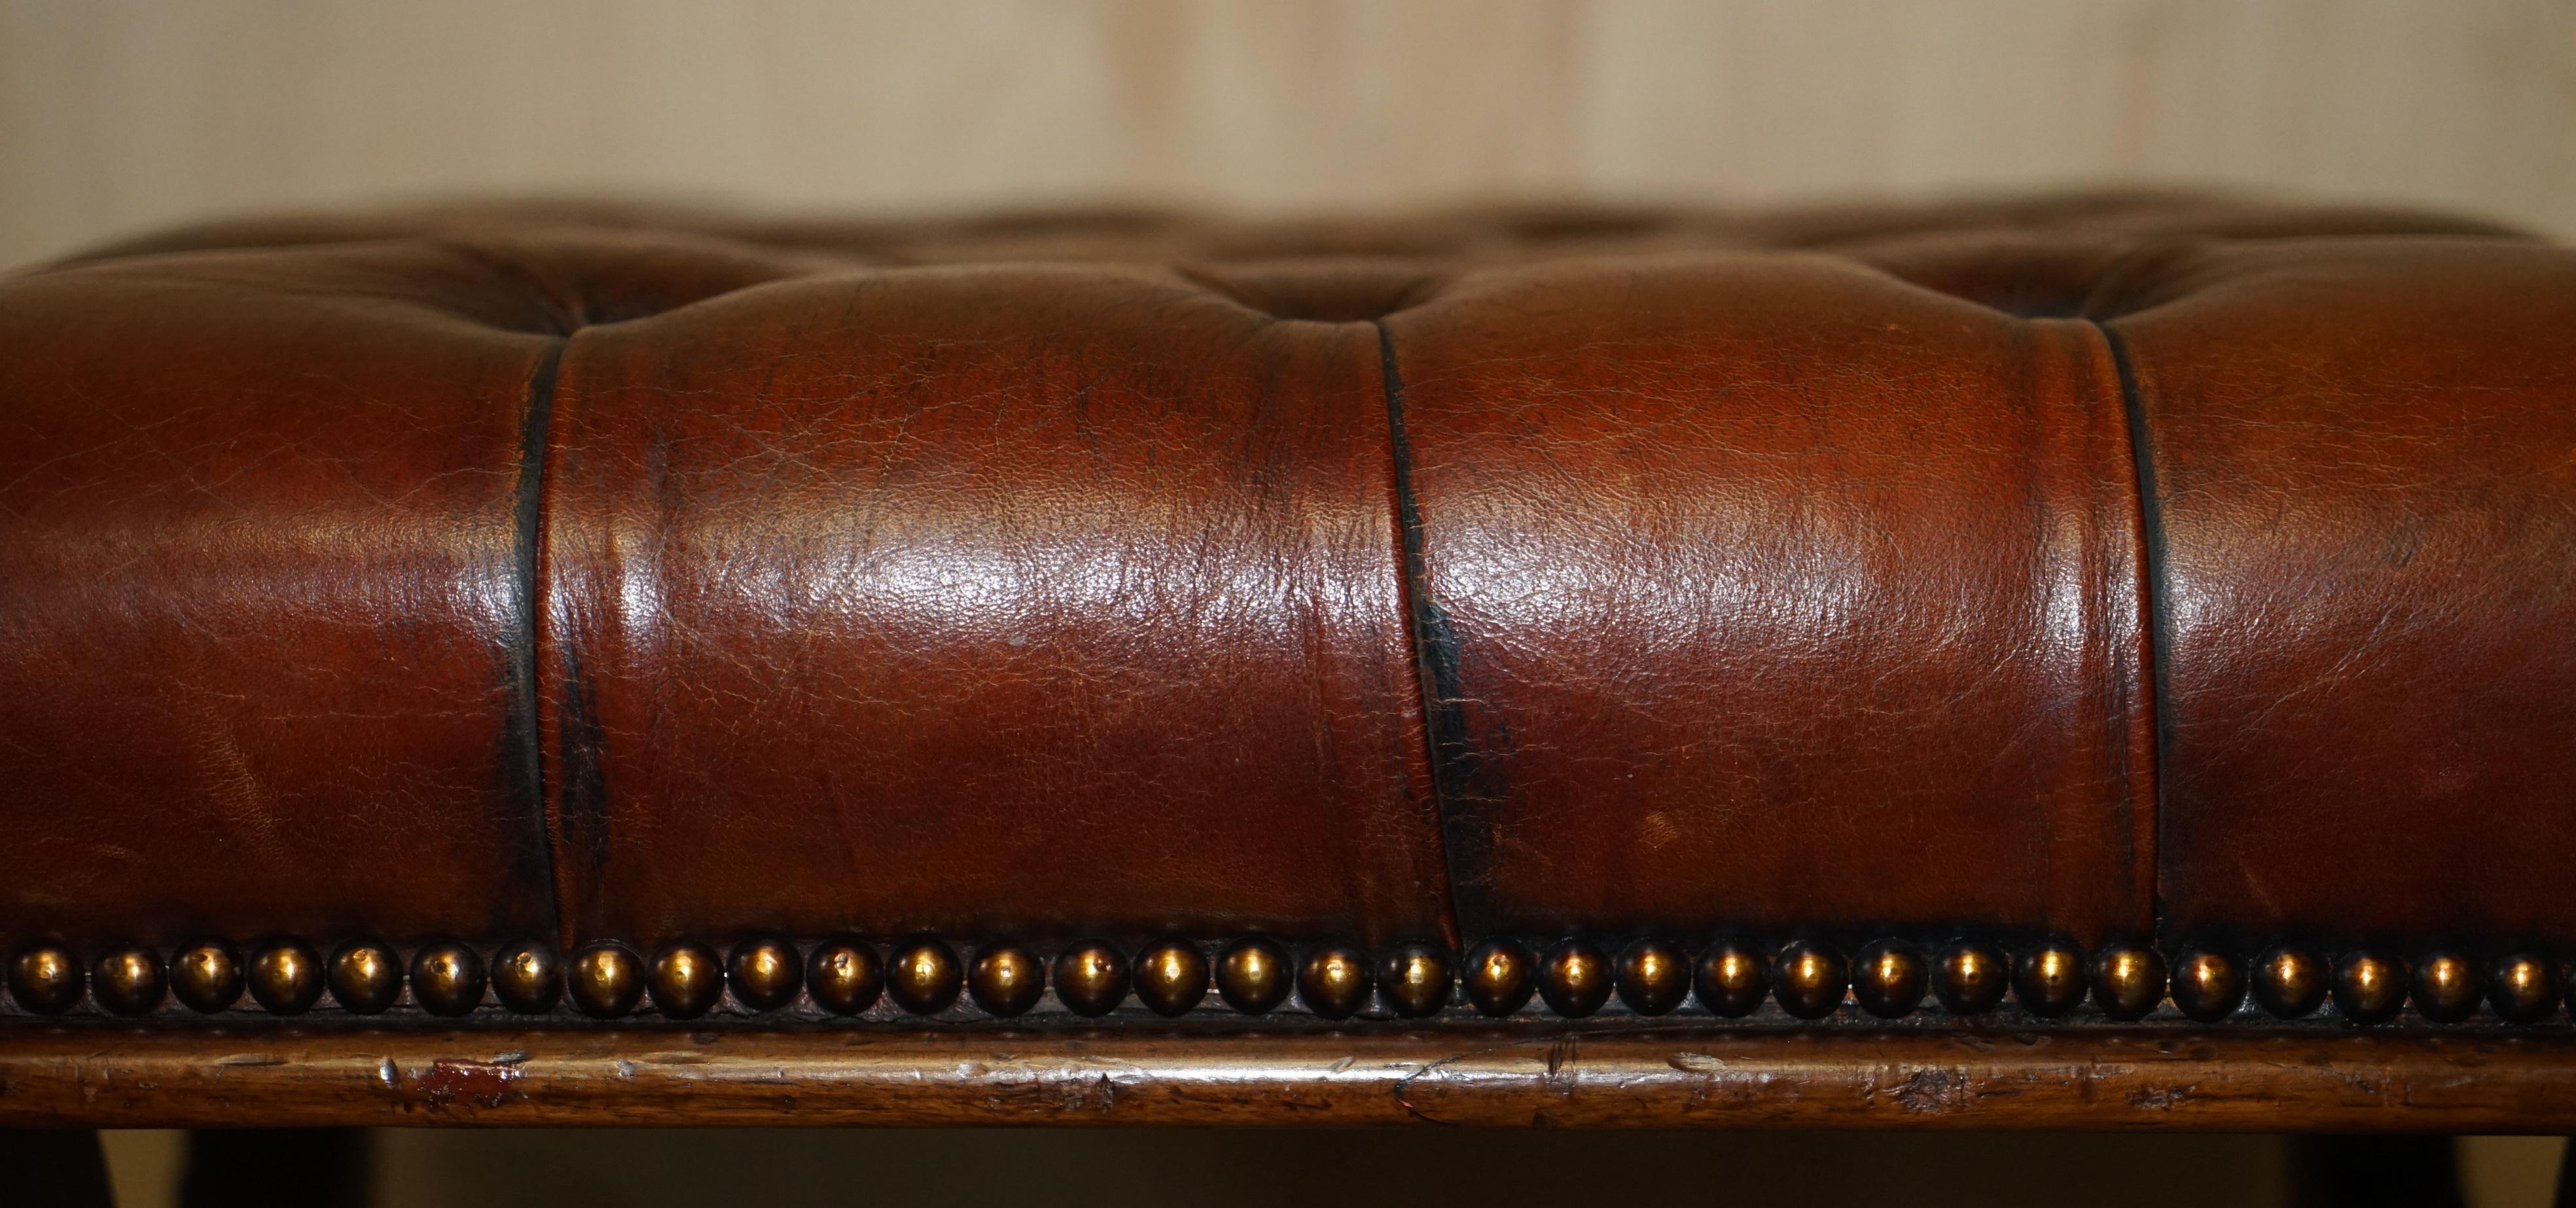 19th Century ANTIQUE ORIGINAL ViCTORIAN LEATHER CHESTERFIELD OTTOMAN FOOTSTOOL CARVED FRAME